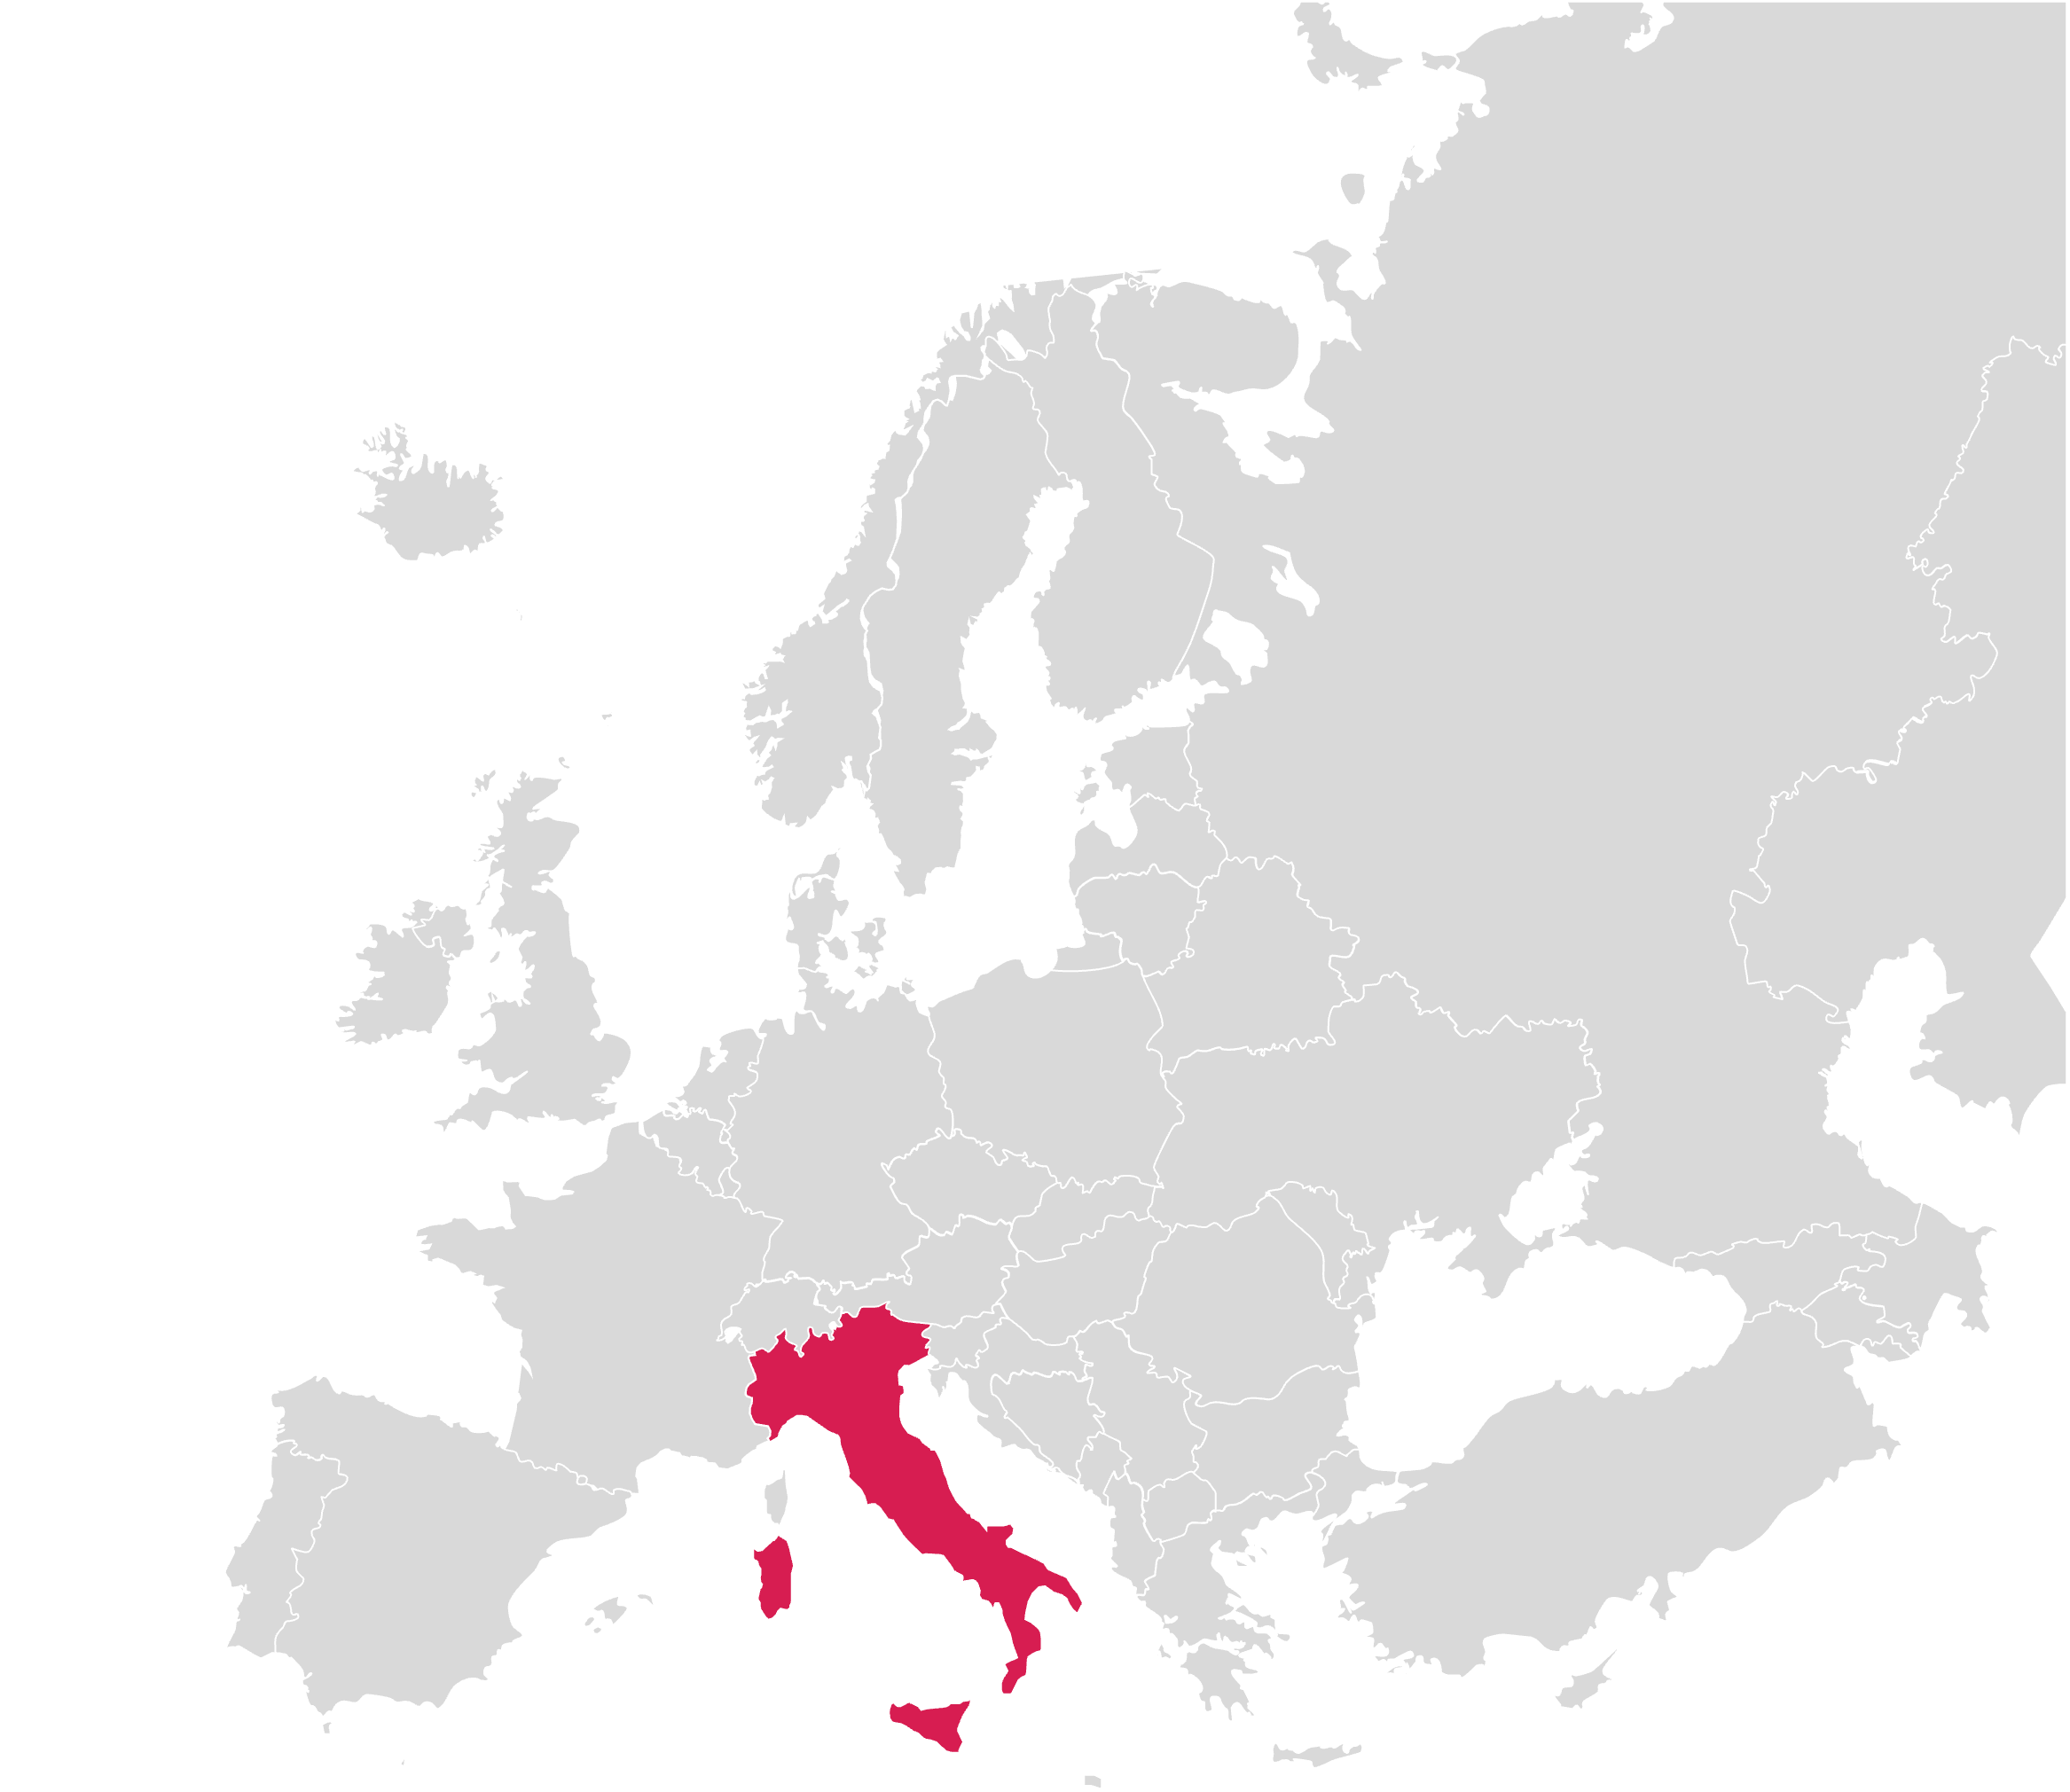 Market Research Map - Italy